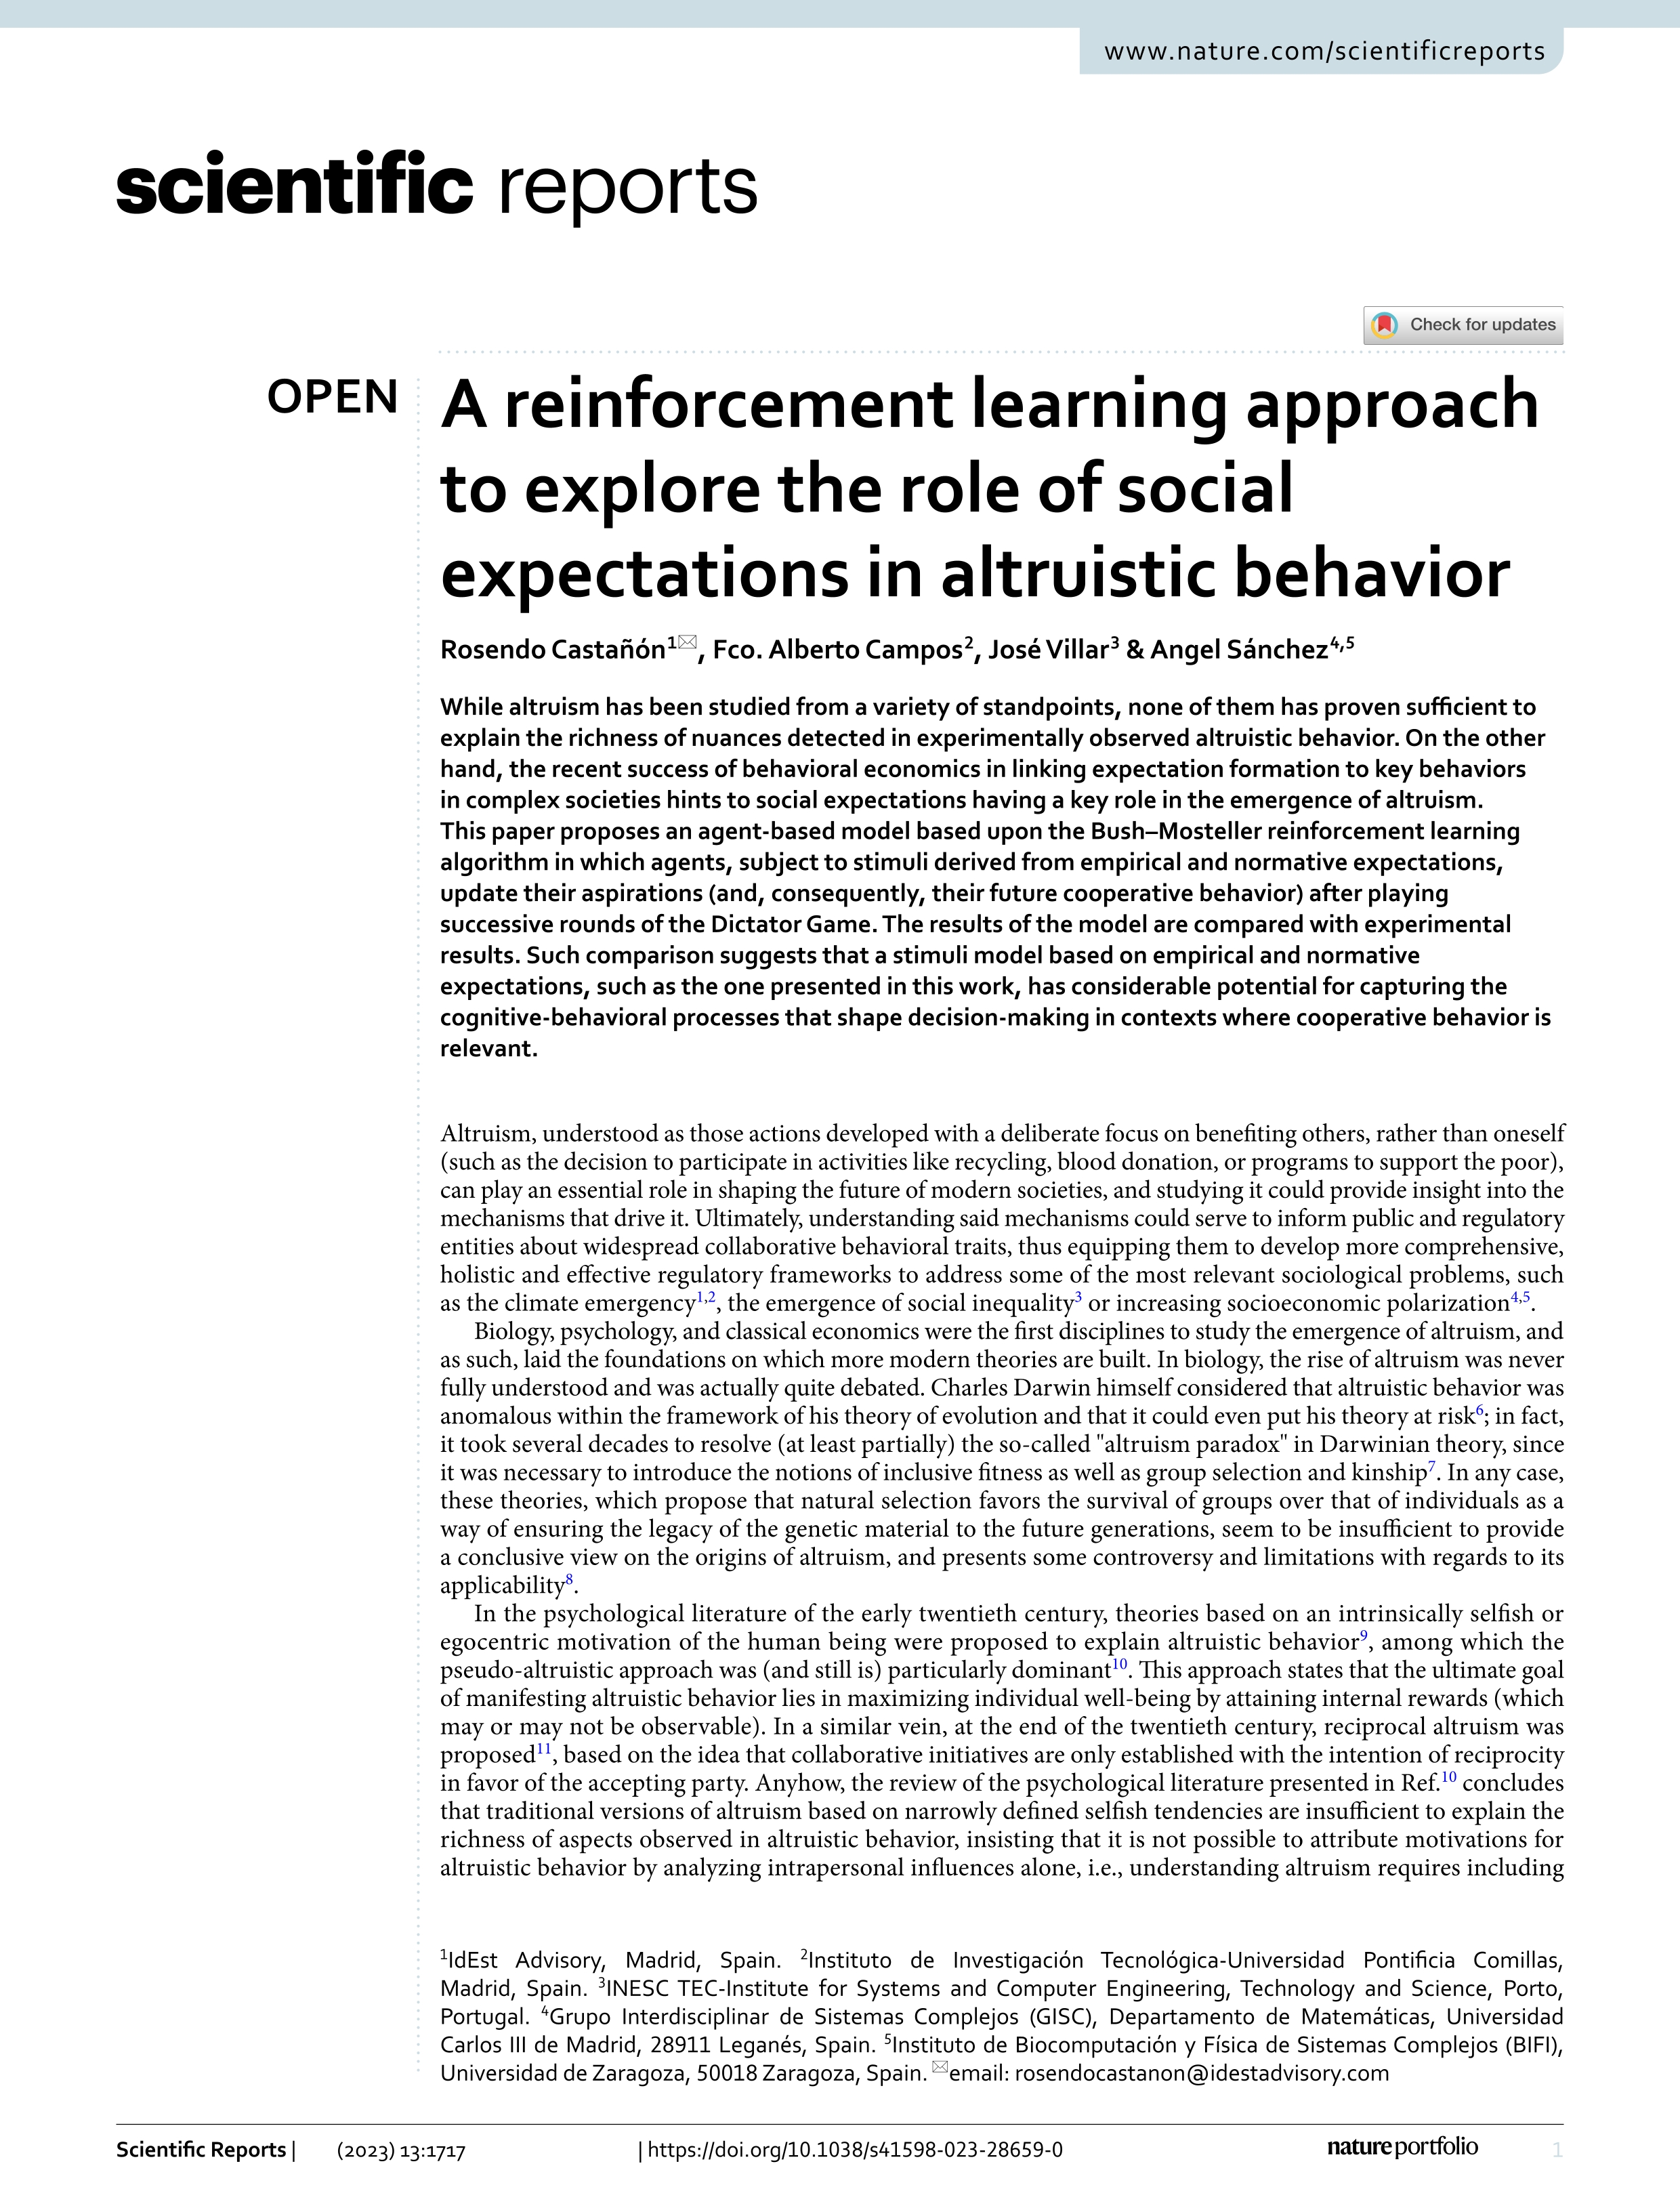 A reinforcement learning approach to explore the role of social expectations in altruistic behavior